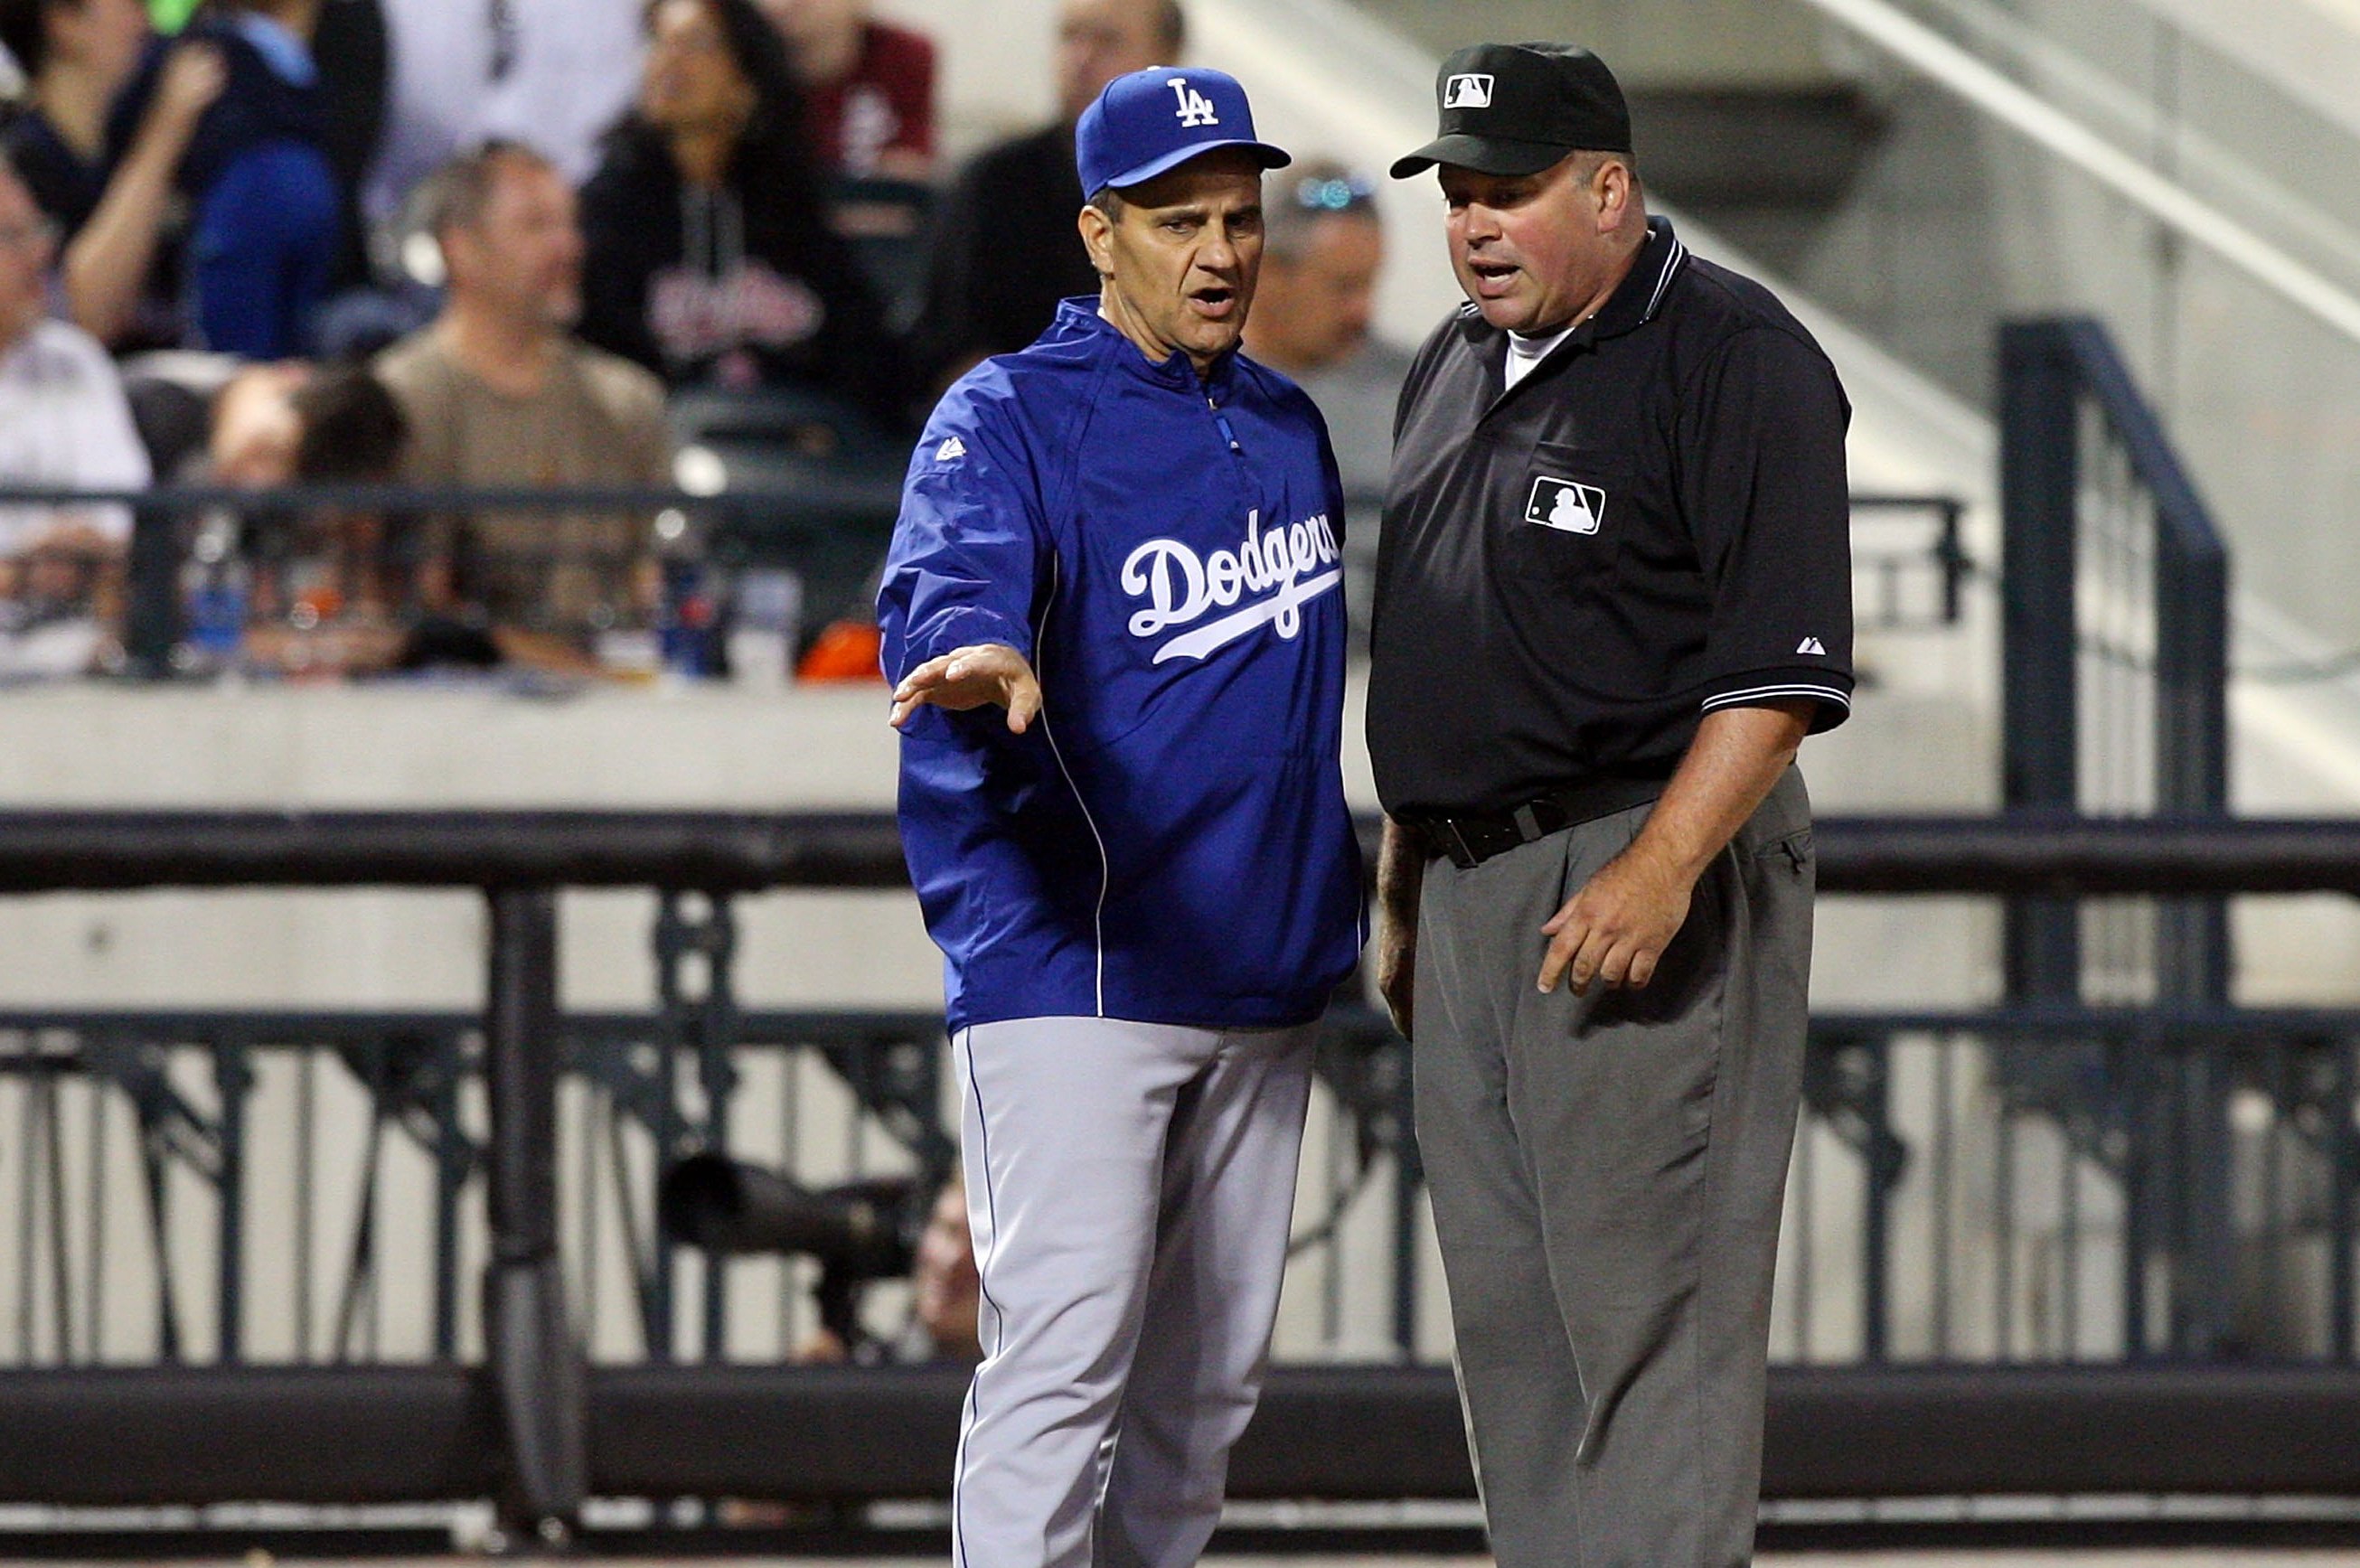 New York Yankees' manager Joe Torre argues with home plate umpire News  Photo - Getty Images